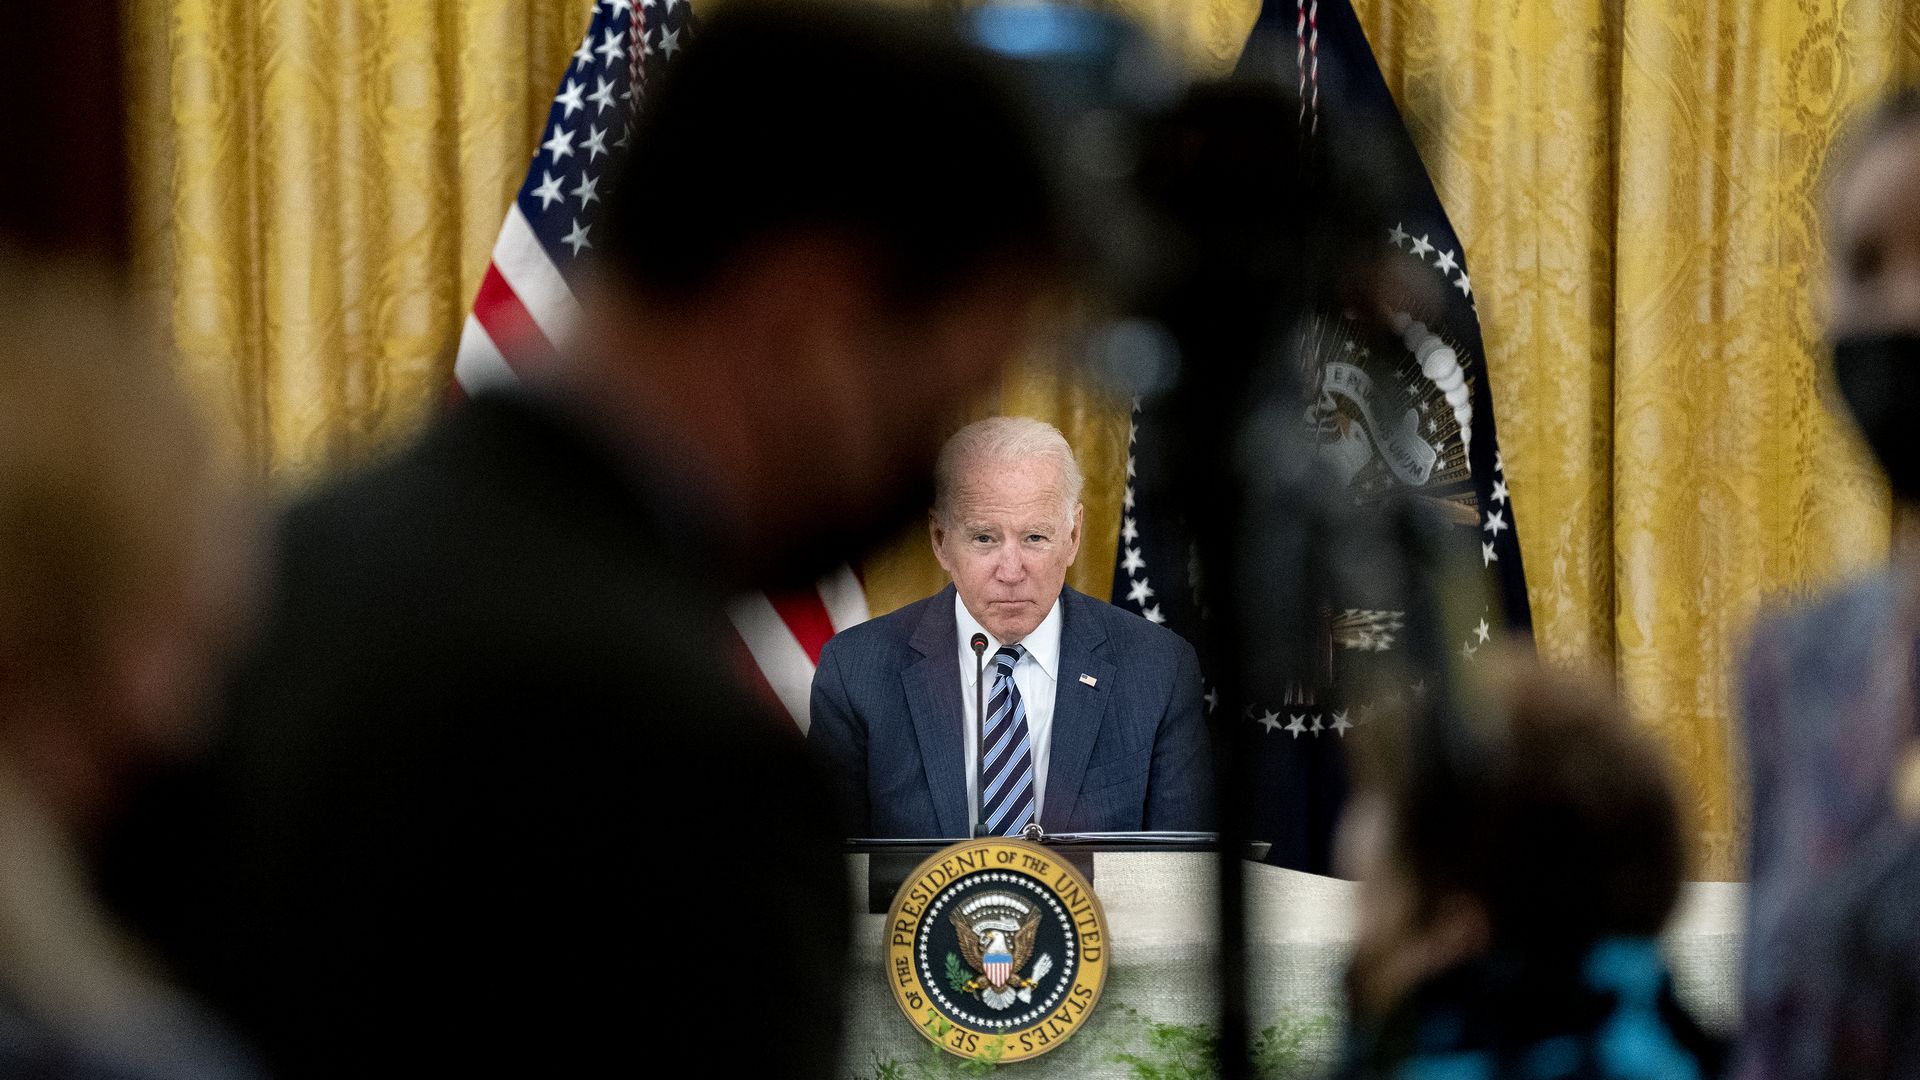 President Biden is seen during a cybersecurity summit on Wednesday.